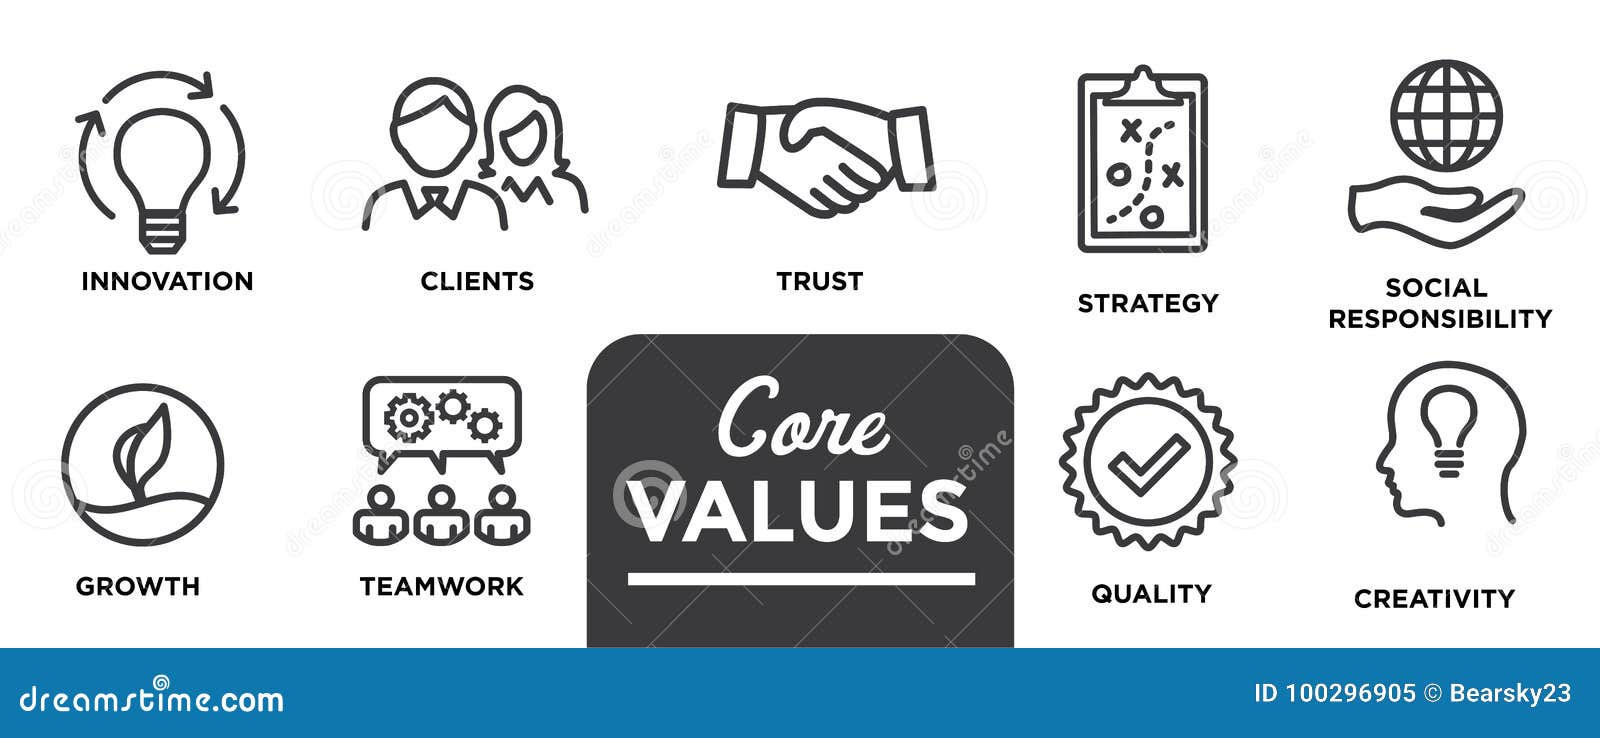 core values - mission, integrity value icon set with vision, hon